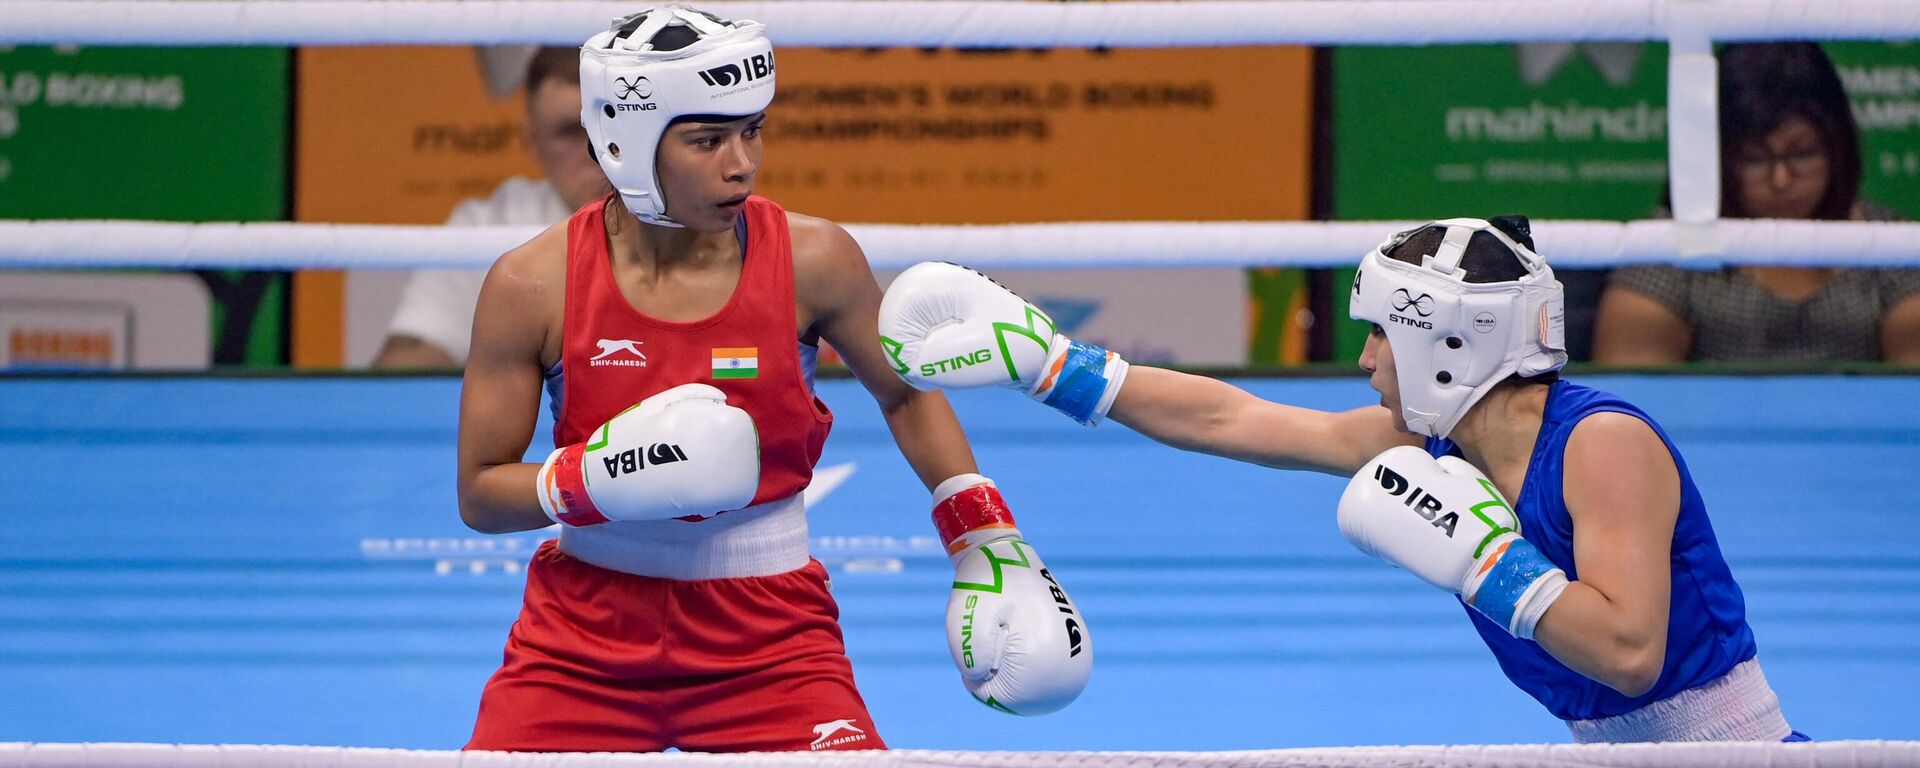 Indian Boxer Nikhat Zareen (L) in action against Azerbaijan boxer Anakhanim Ismayilova during the preliminary round of the Elite women 48-50 kgs light fly IBA Women’s World Boxing Championship 2023, in New Delhi on March 16, 2023. - Sputnik India, 1920, 16.03.2023